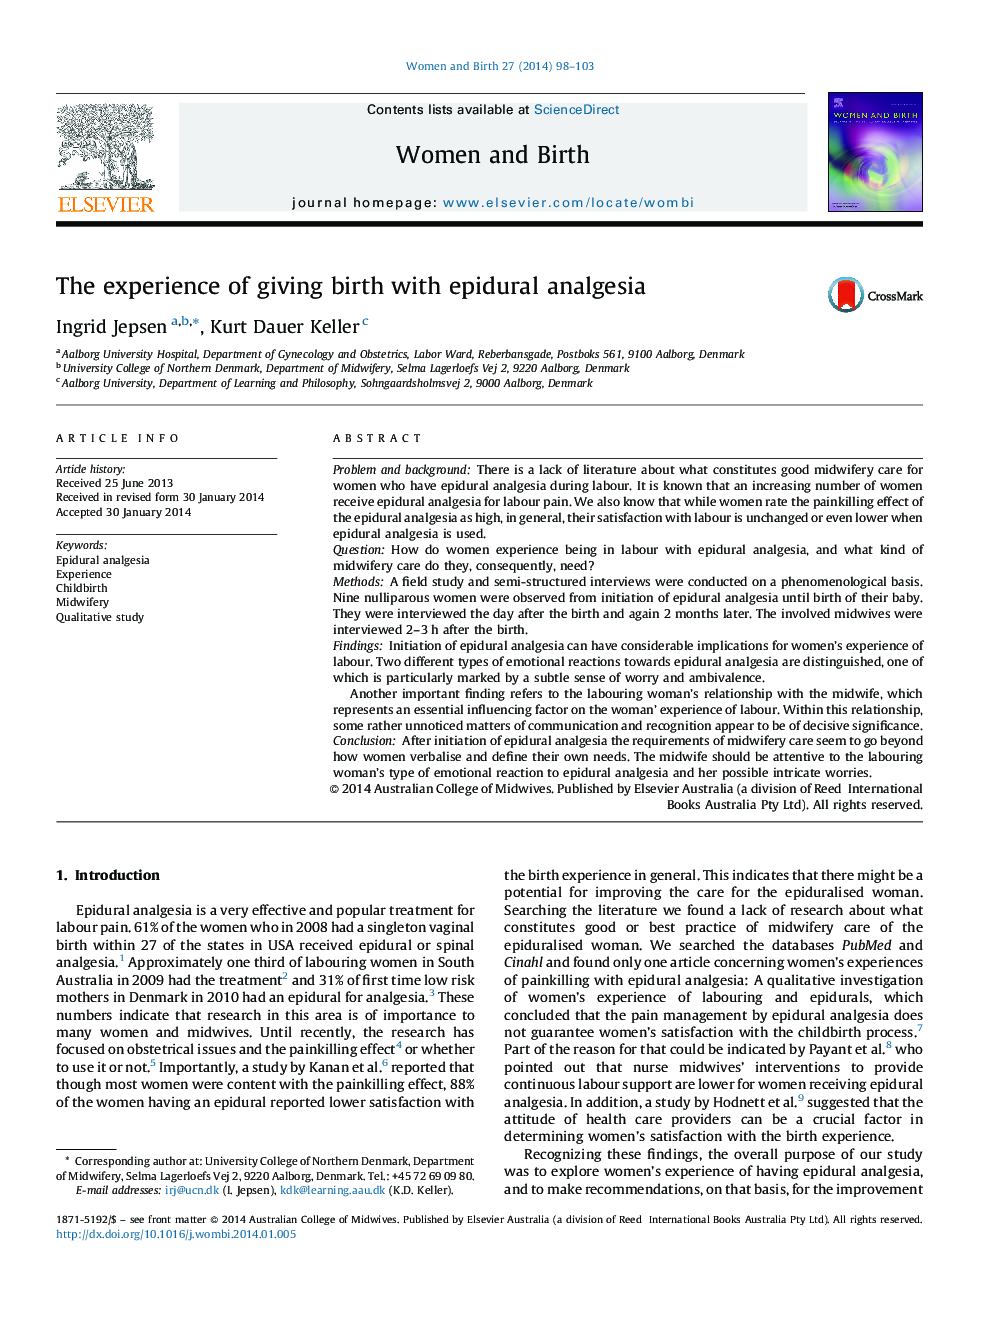 The experience of giving birth with epidural analgesia